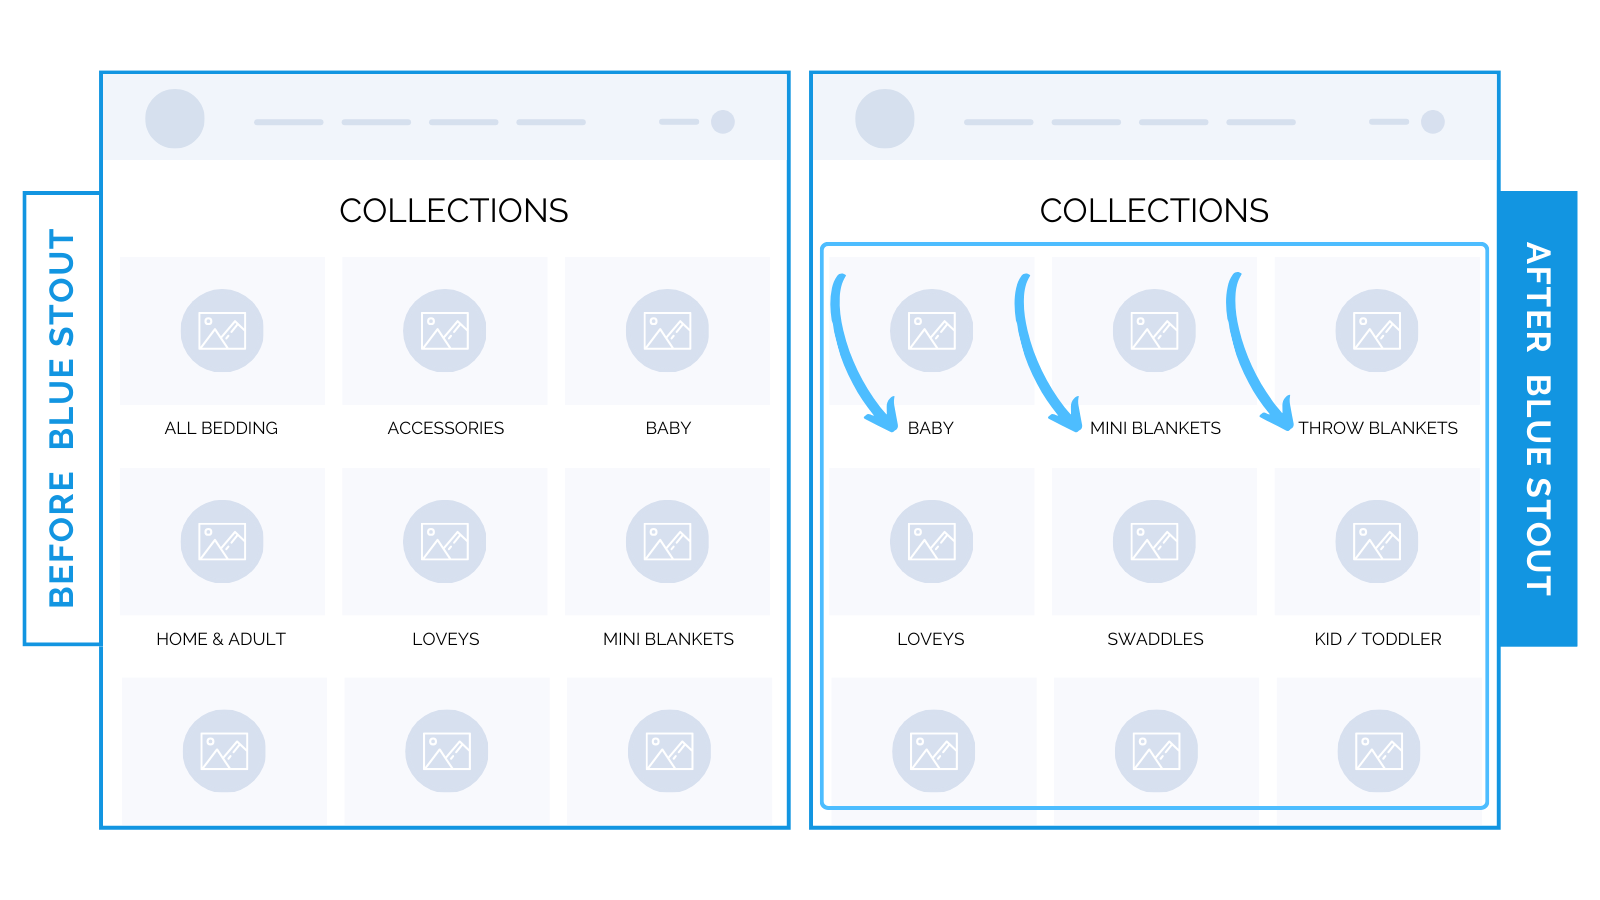 How to maximize revenue per user on collections listings.